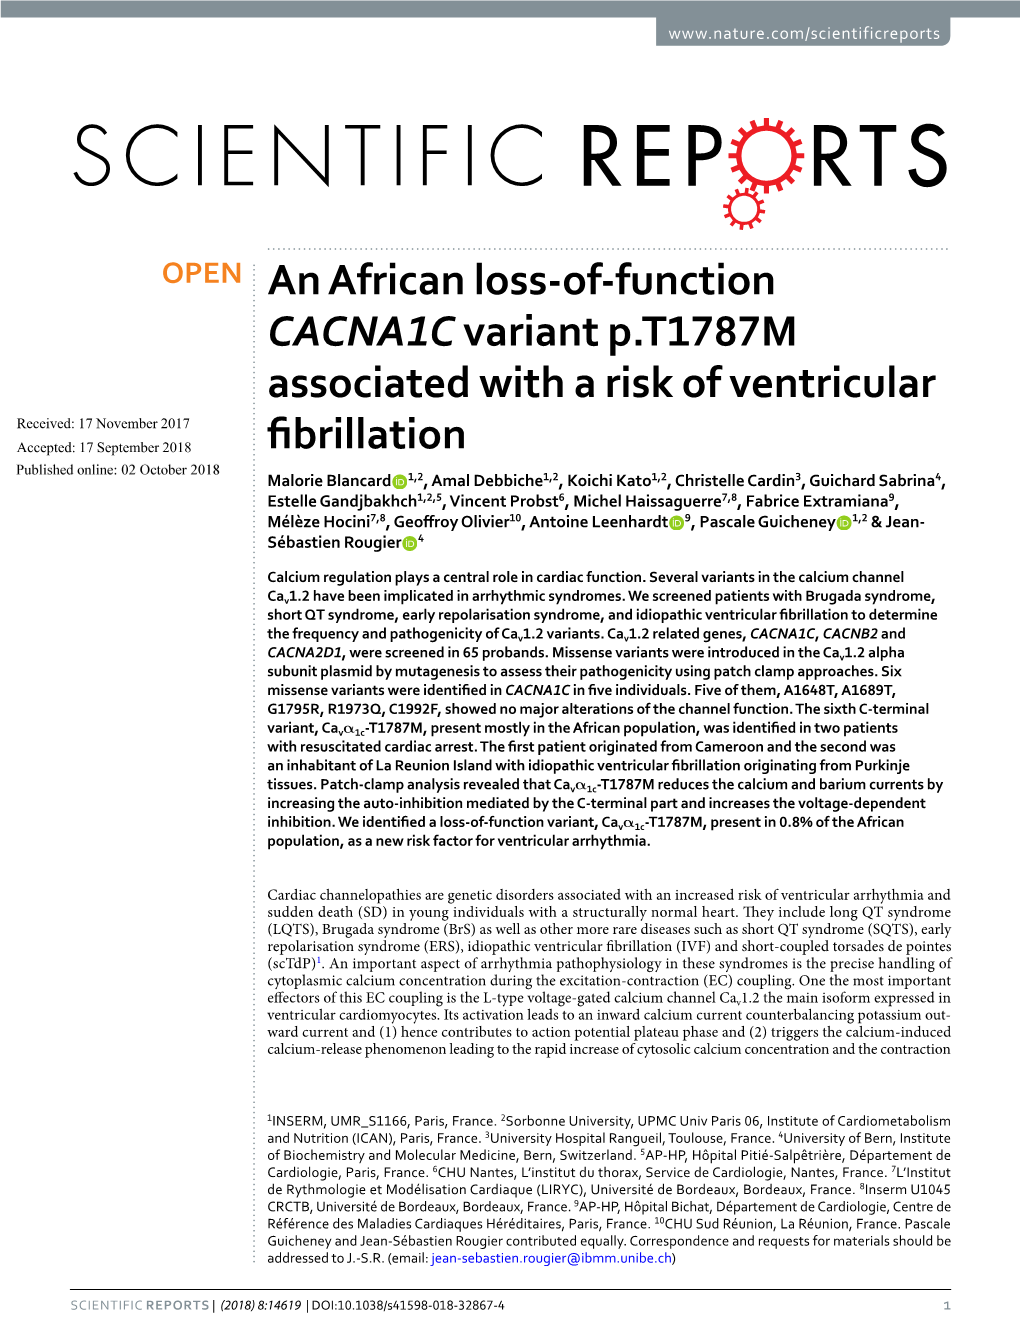 An African Loss-Of-Function CACNA1C Variant P.T1787M Associated with A